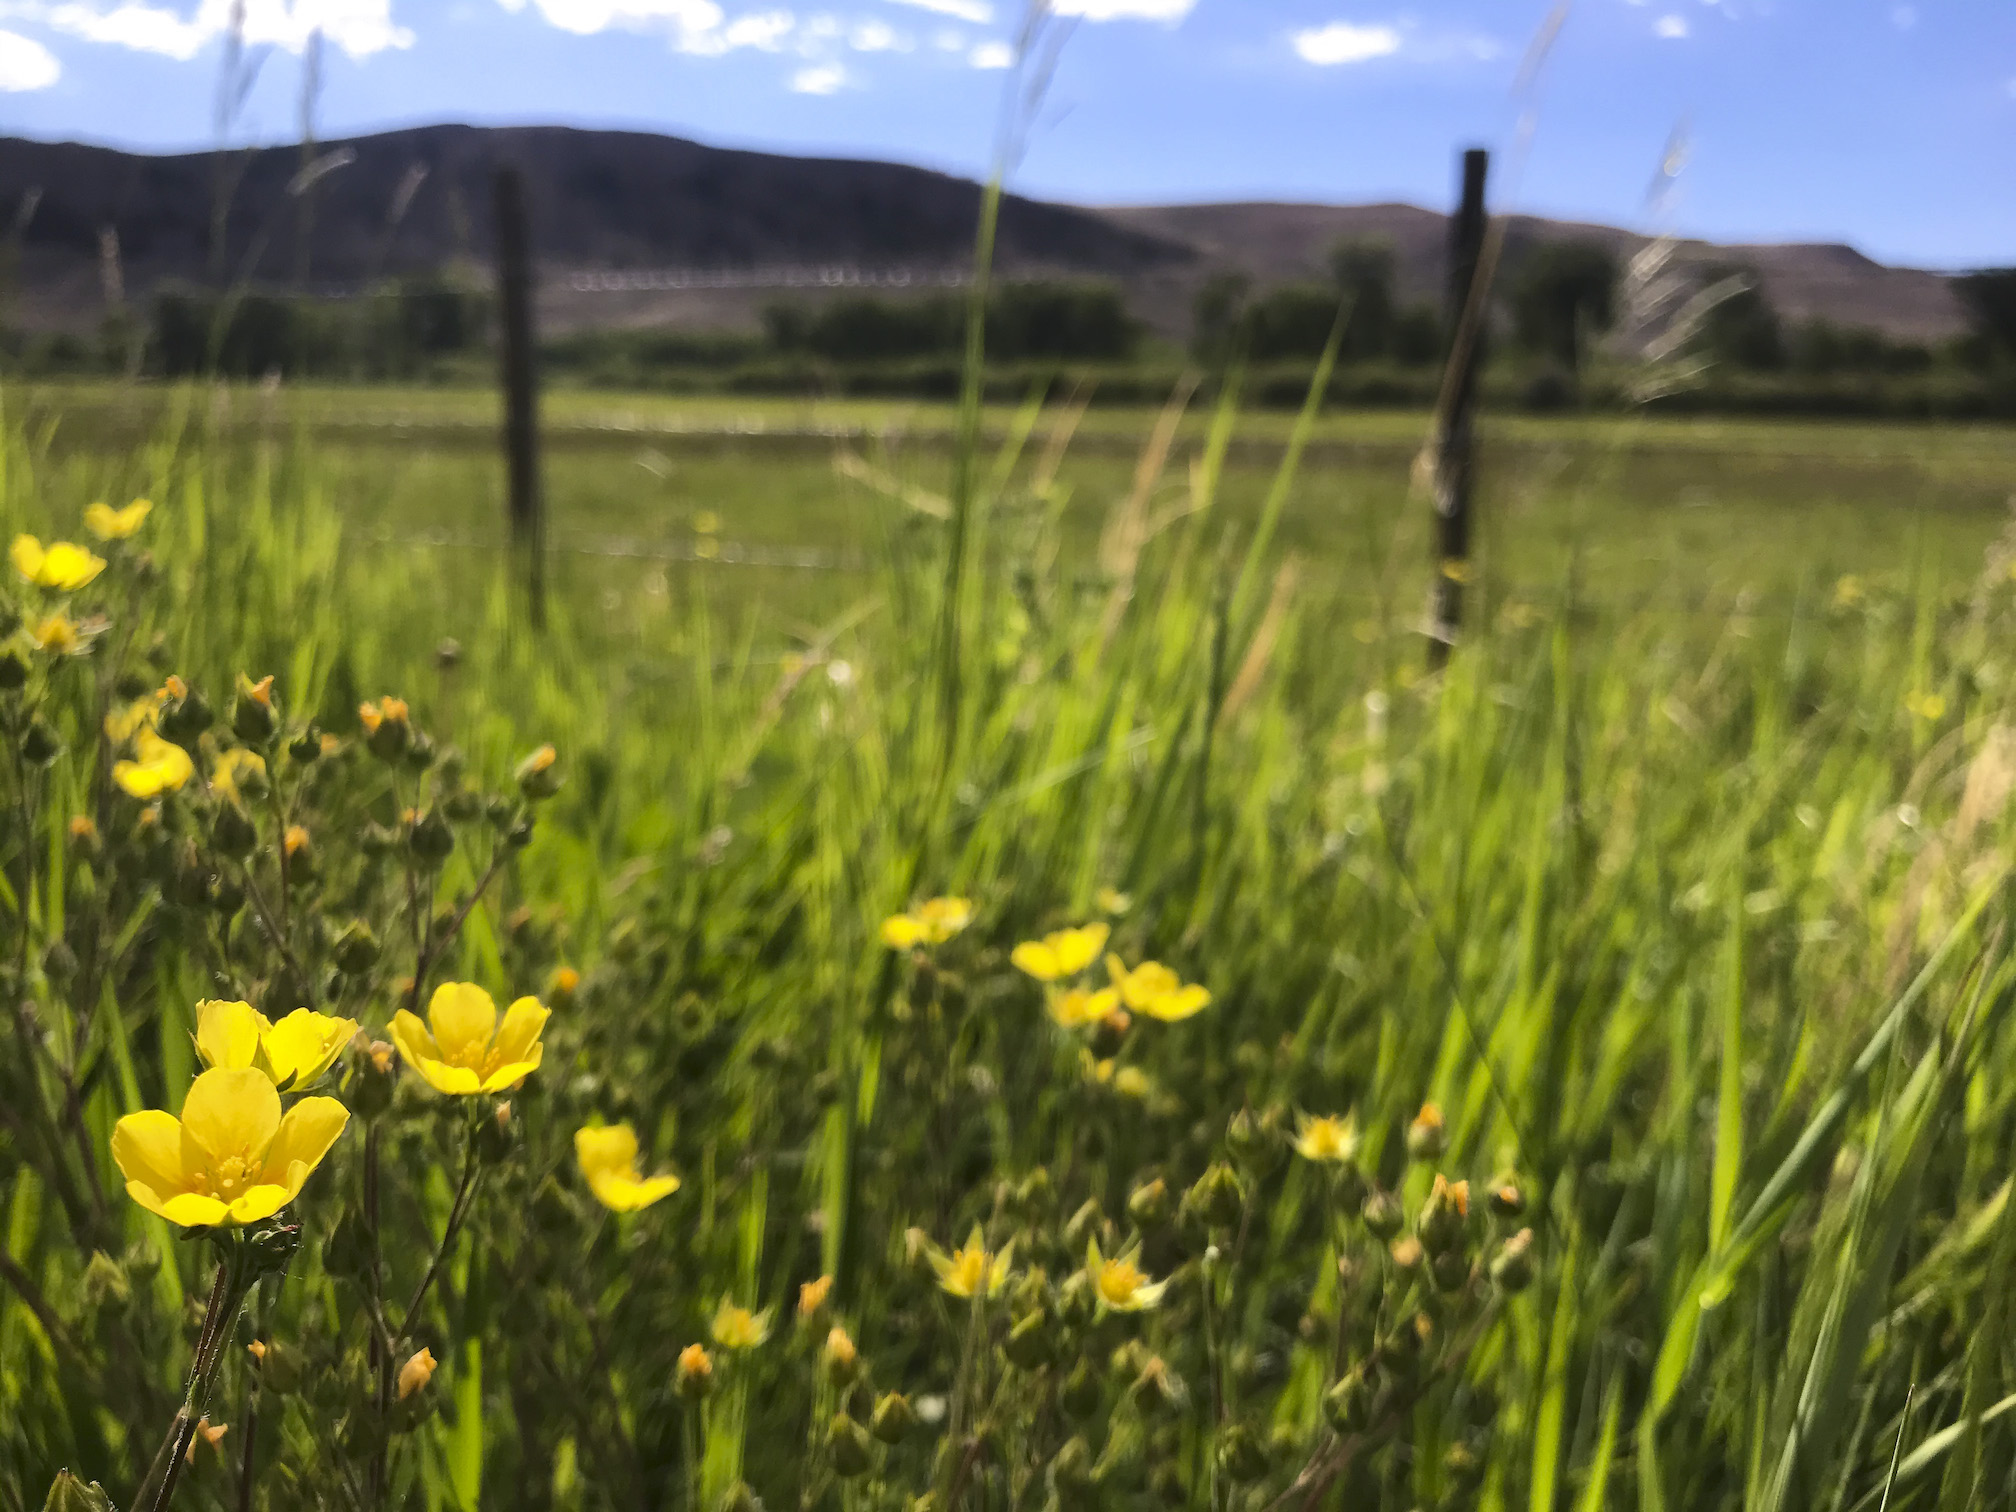 A field of flowers and grass with mountain peaks in the background. The Van Tuyl trails sprout wildflowers in gunnison